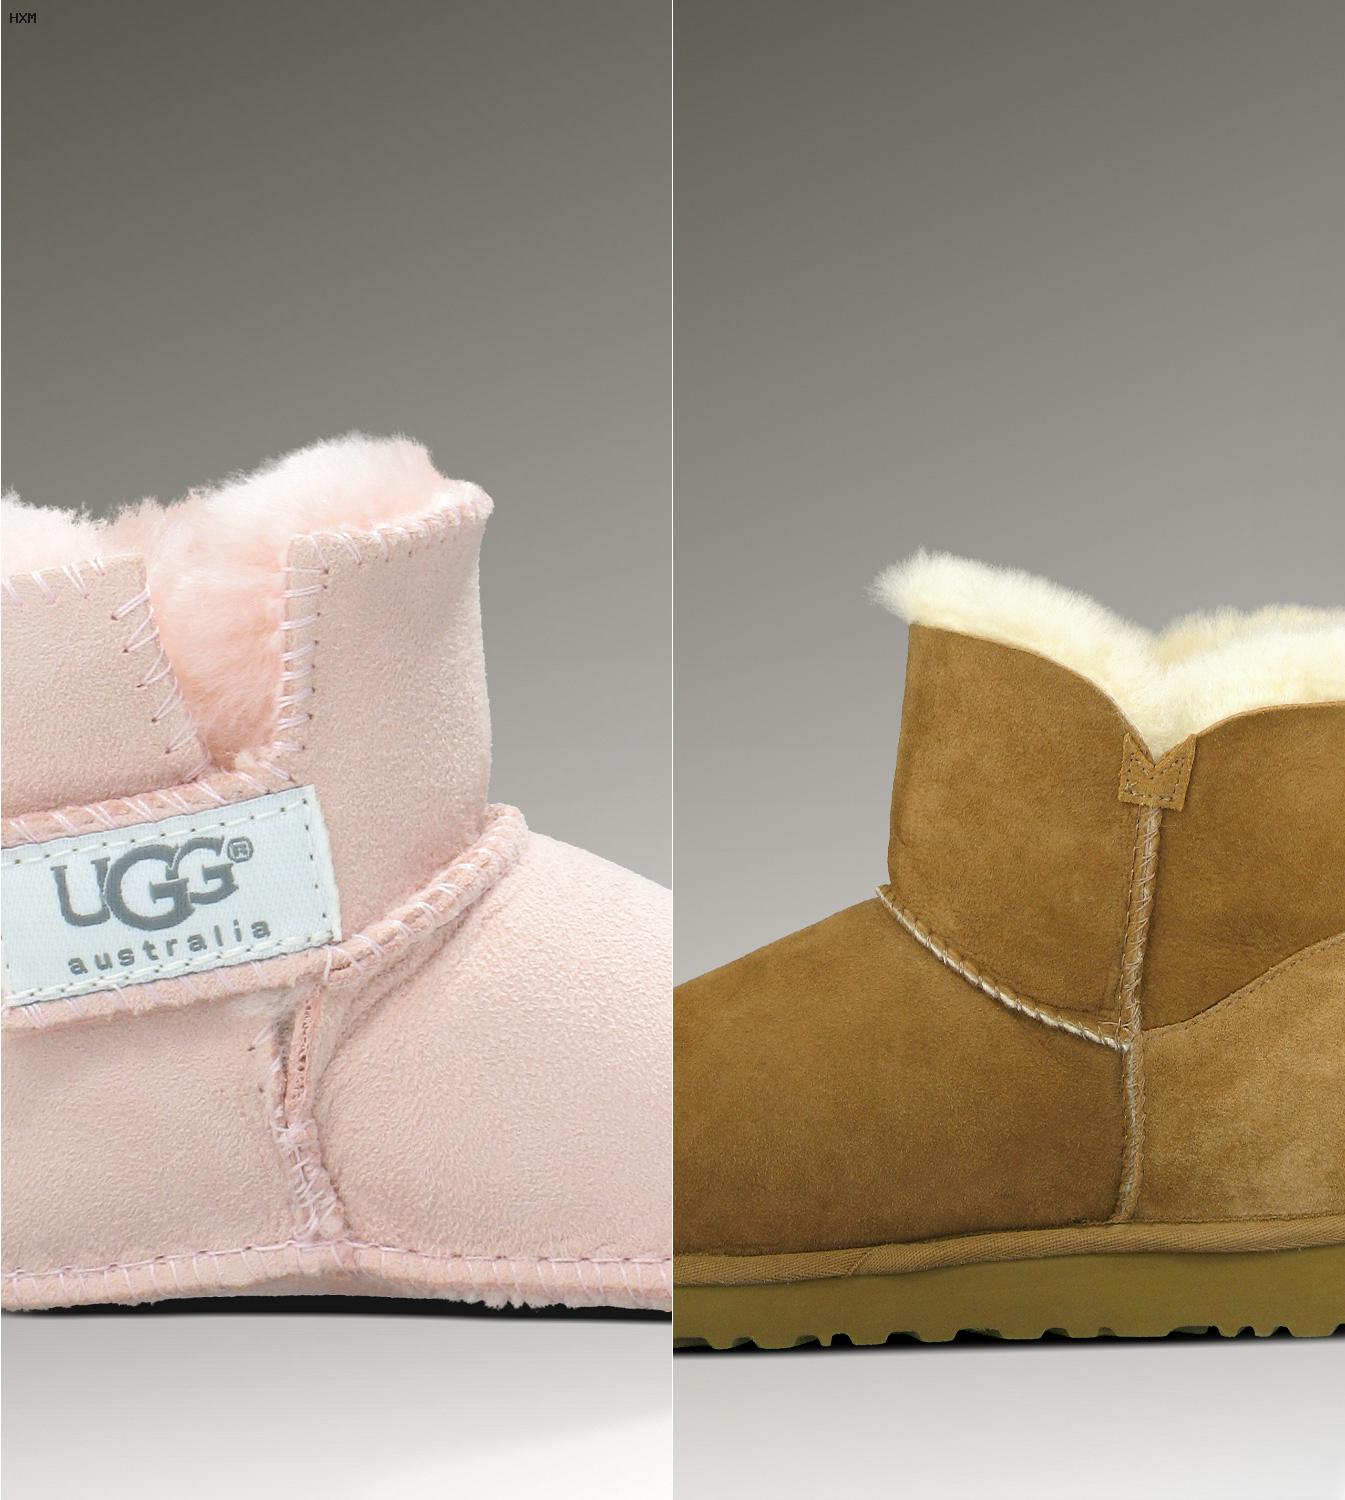 cheap ugg style boots